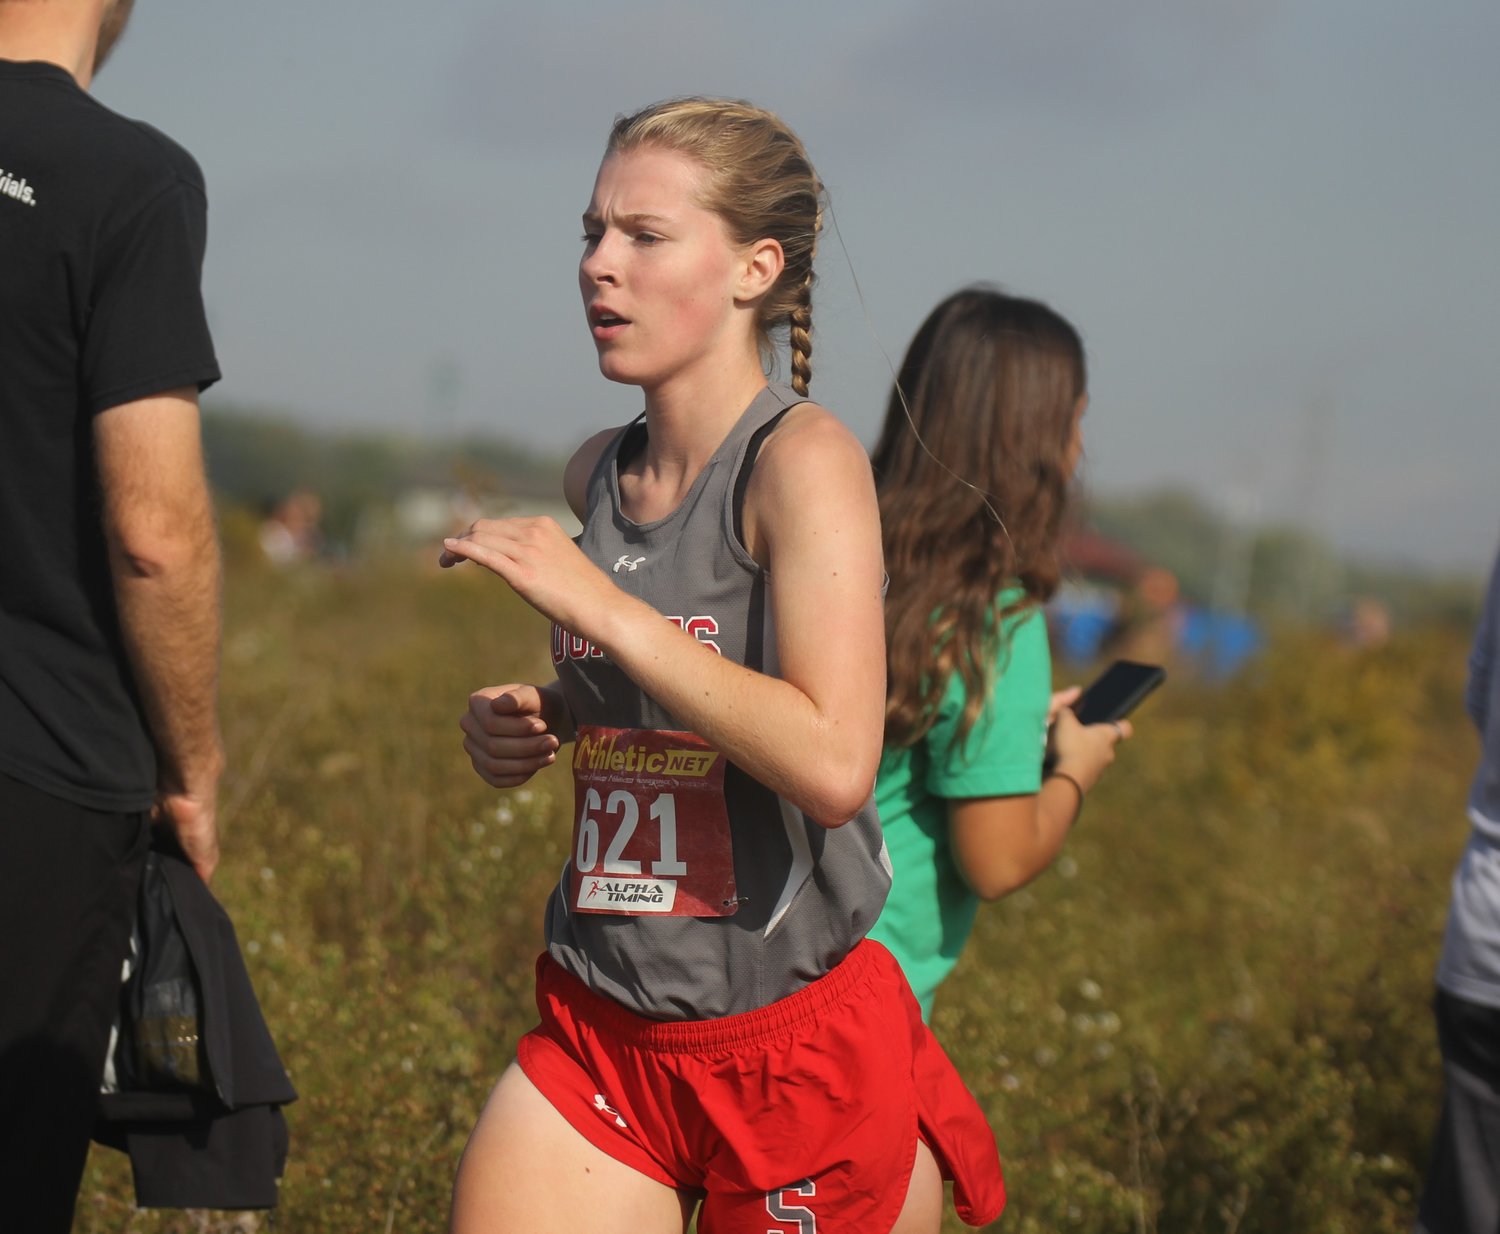 Southmont's Faith Allen placed 50th overall at the Shelbyville Semi-State on Saturday